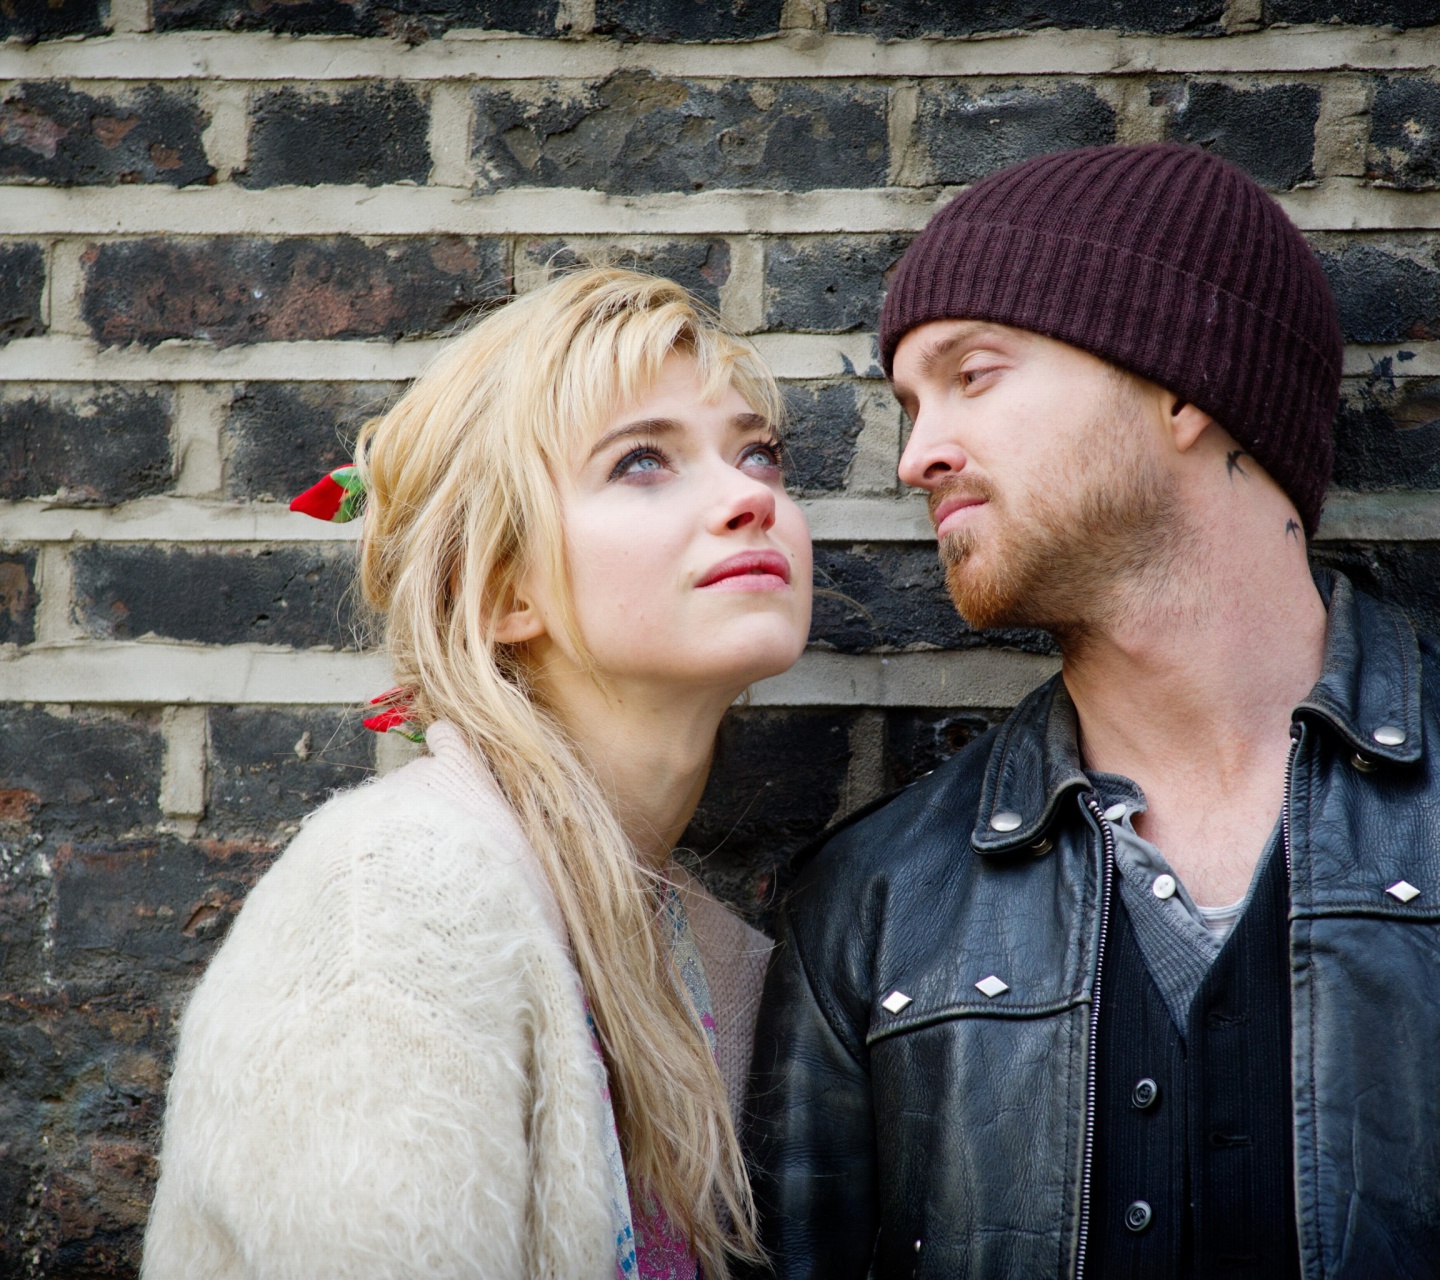 A Long Way Down with Aaron Paul and Imogen Poots wallpaper 1440x1280